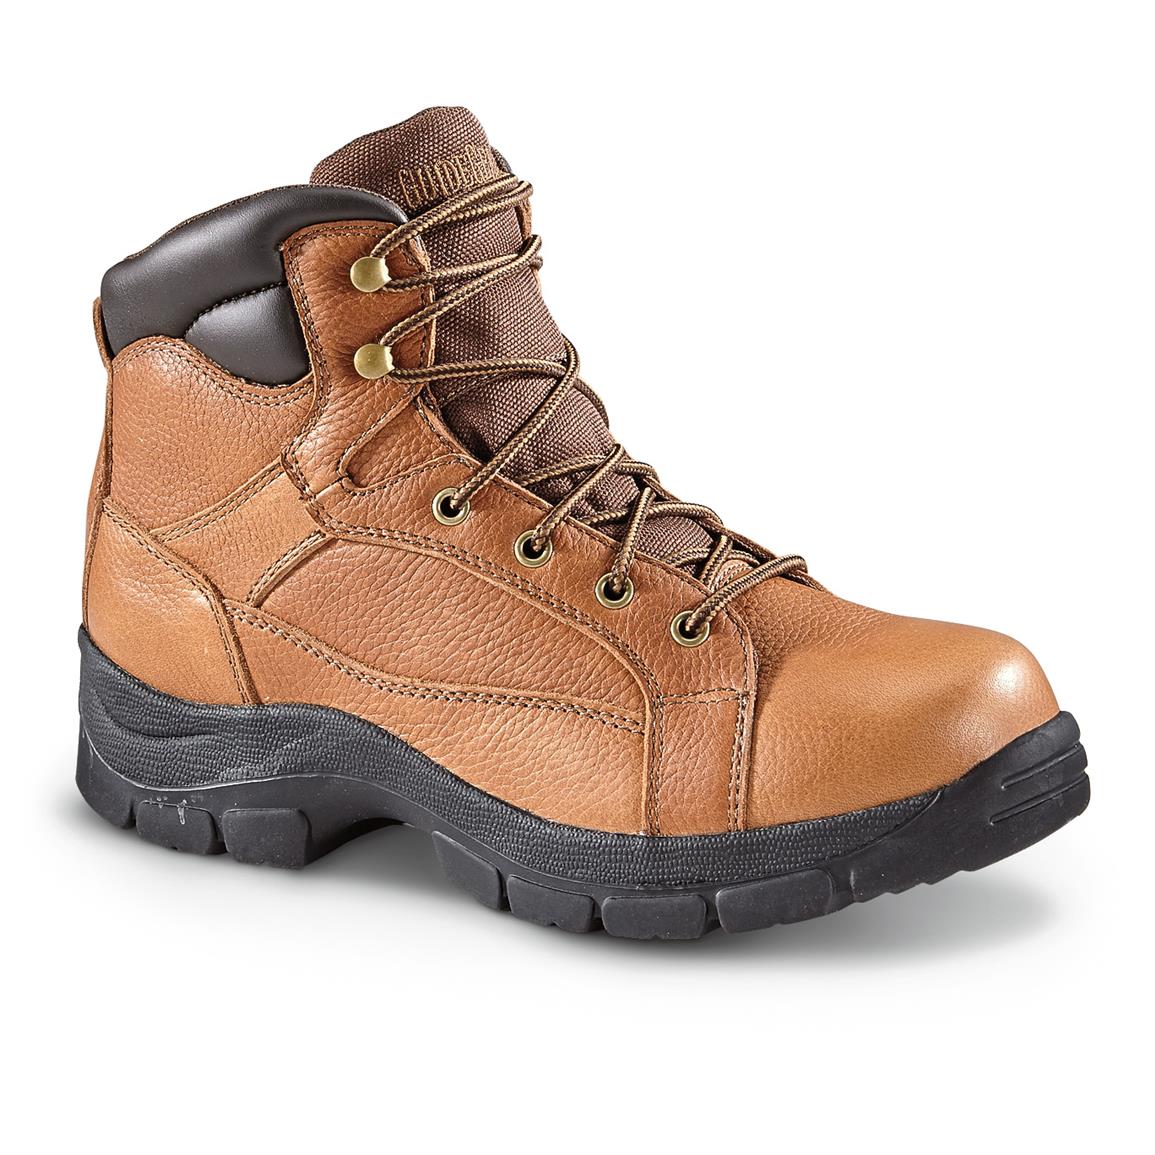 Guide Gear Men's EL-05 Work Boots - 660404, Work Boots at Sportsman's Guide